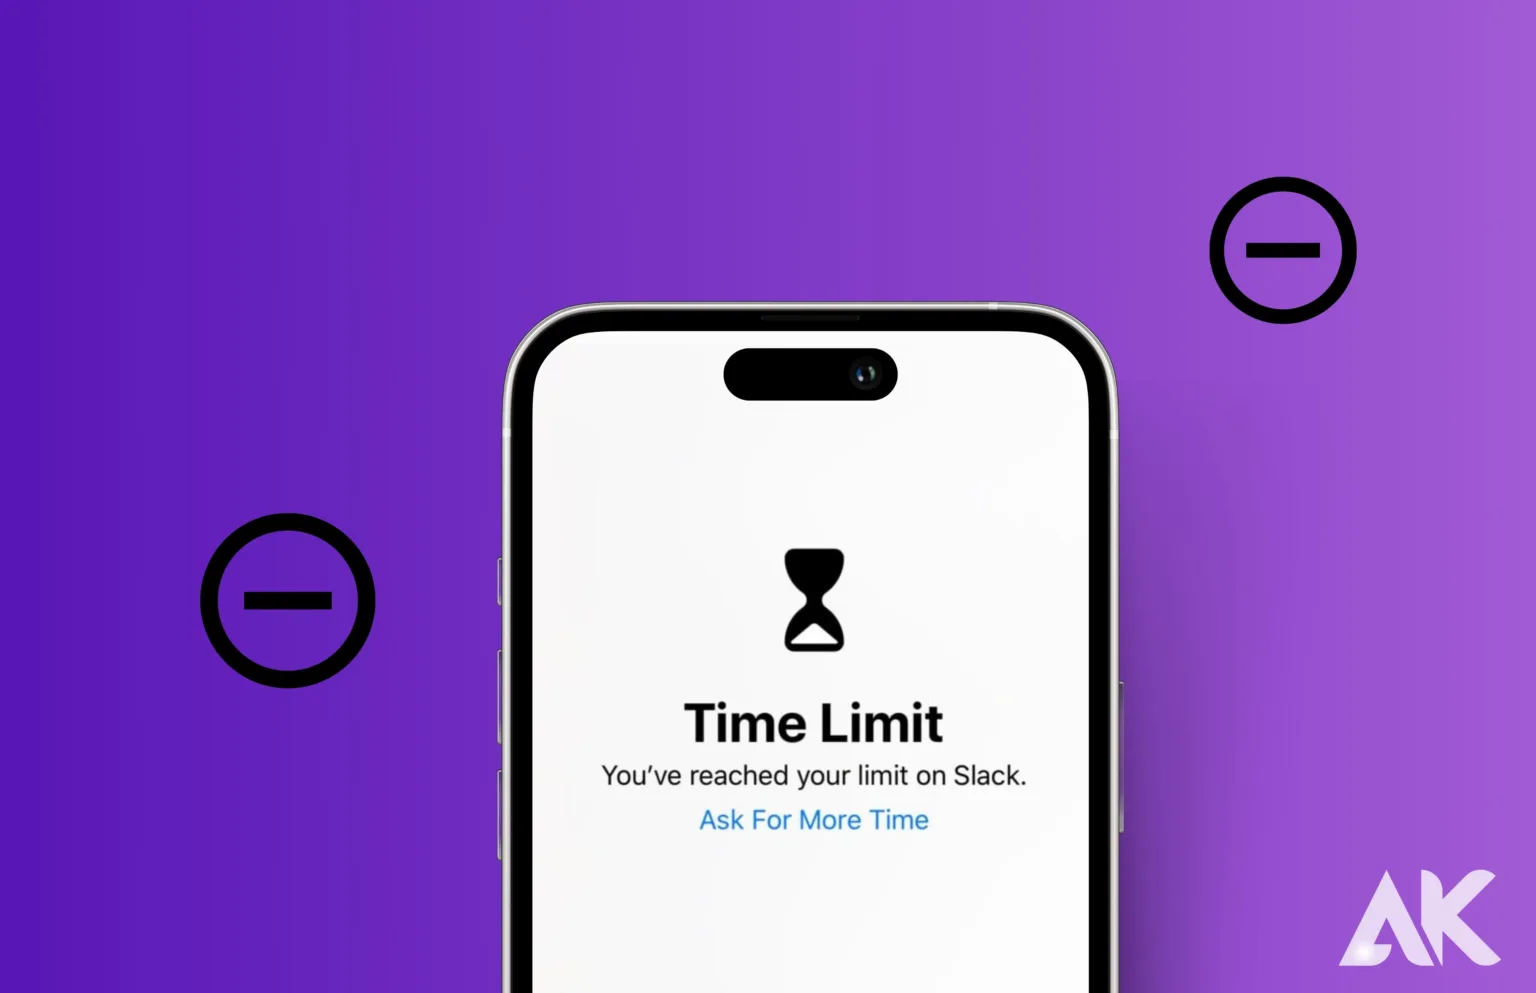 How To Remove Time Limit On iPhone - Easy 7 Tips